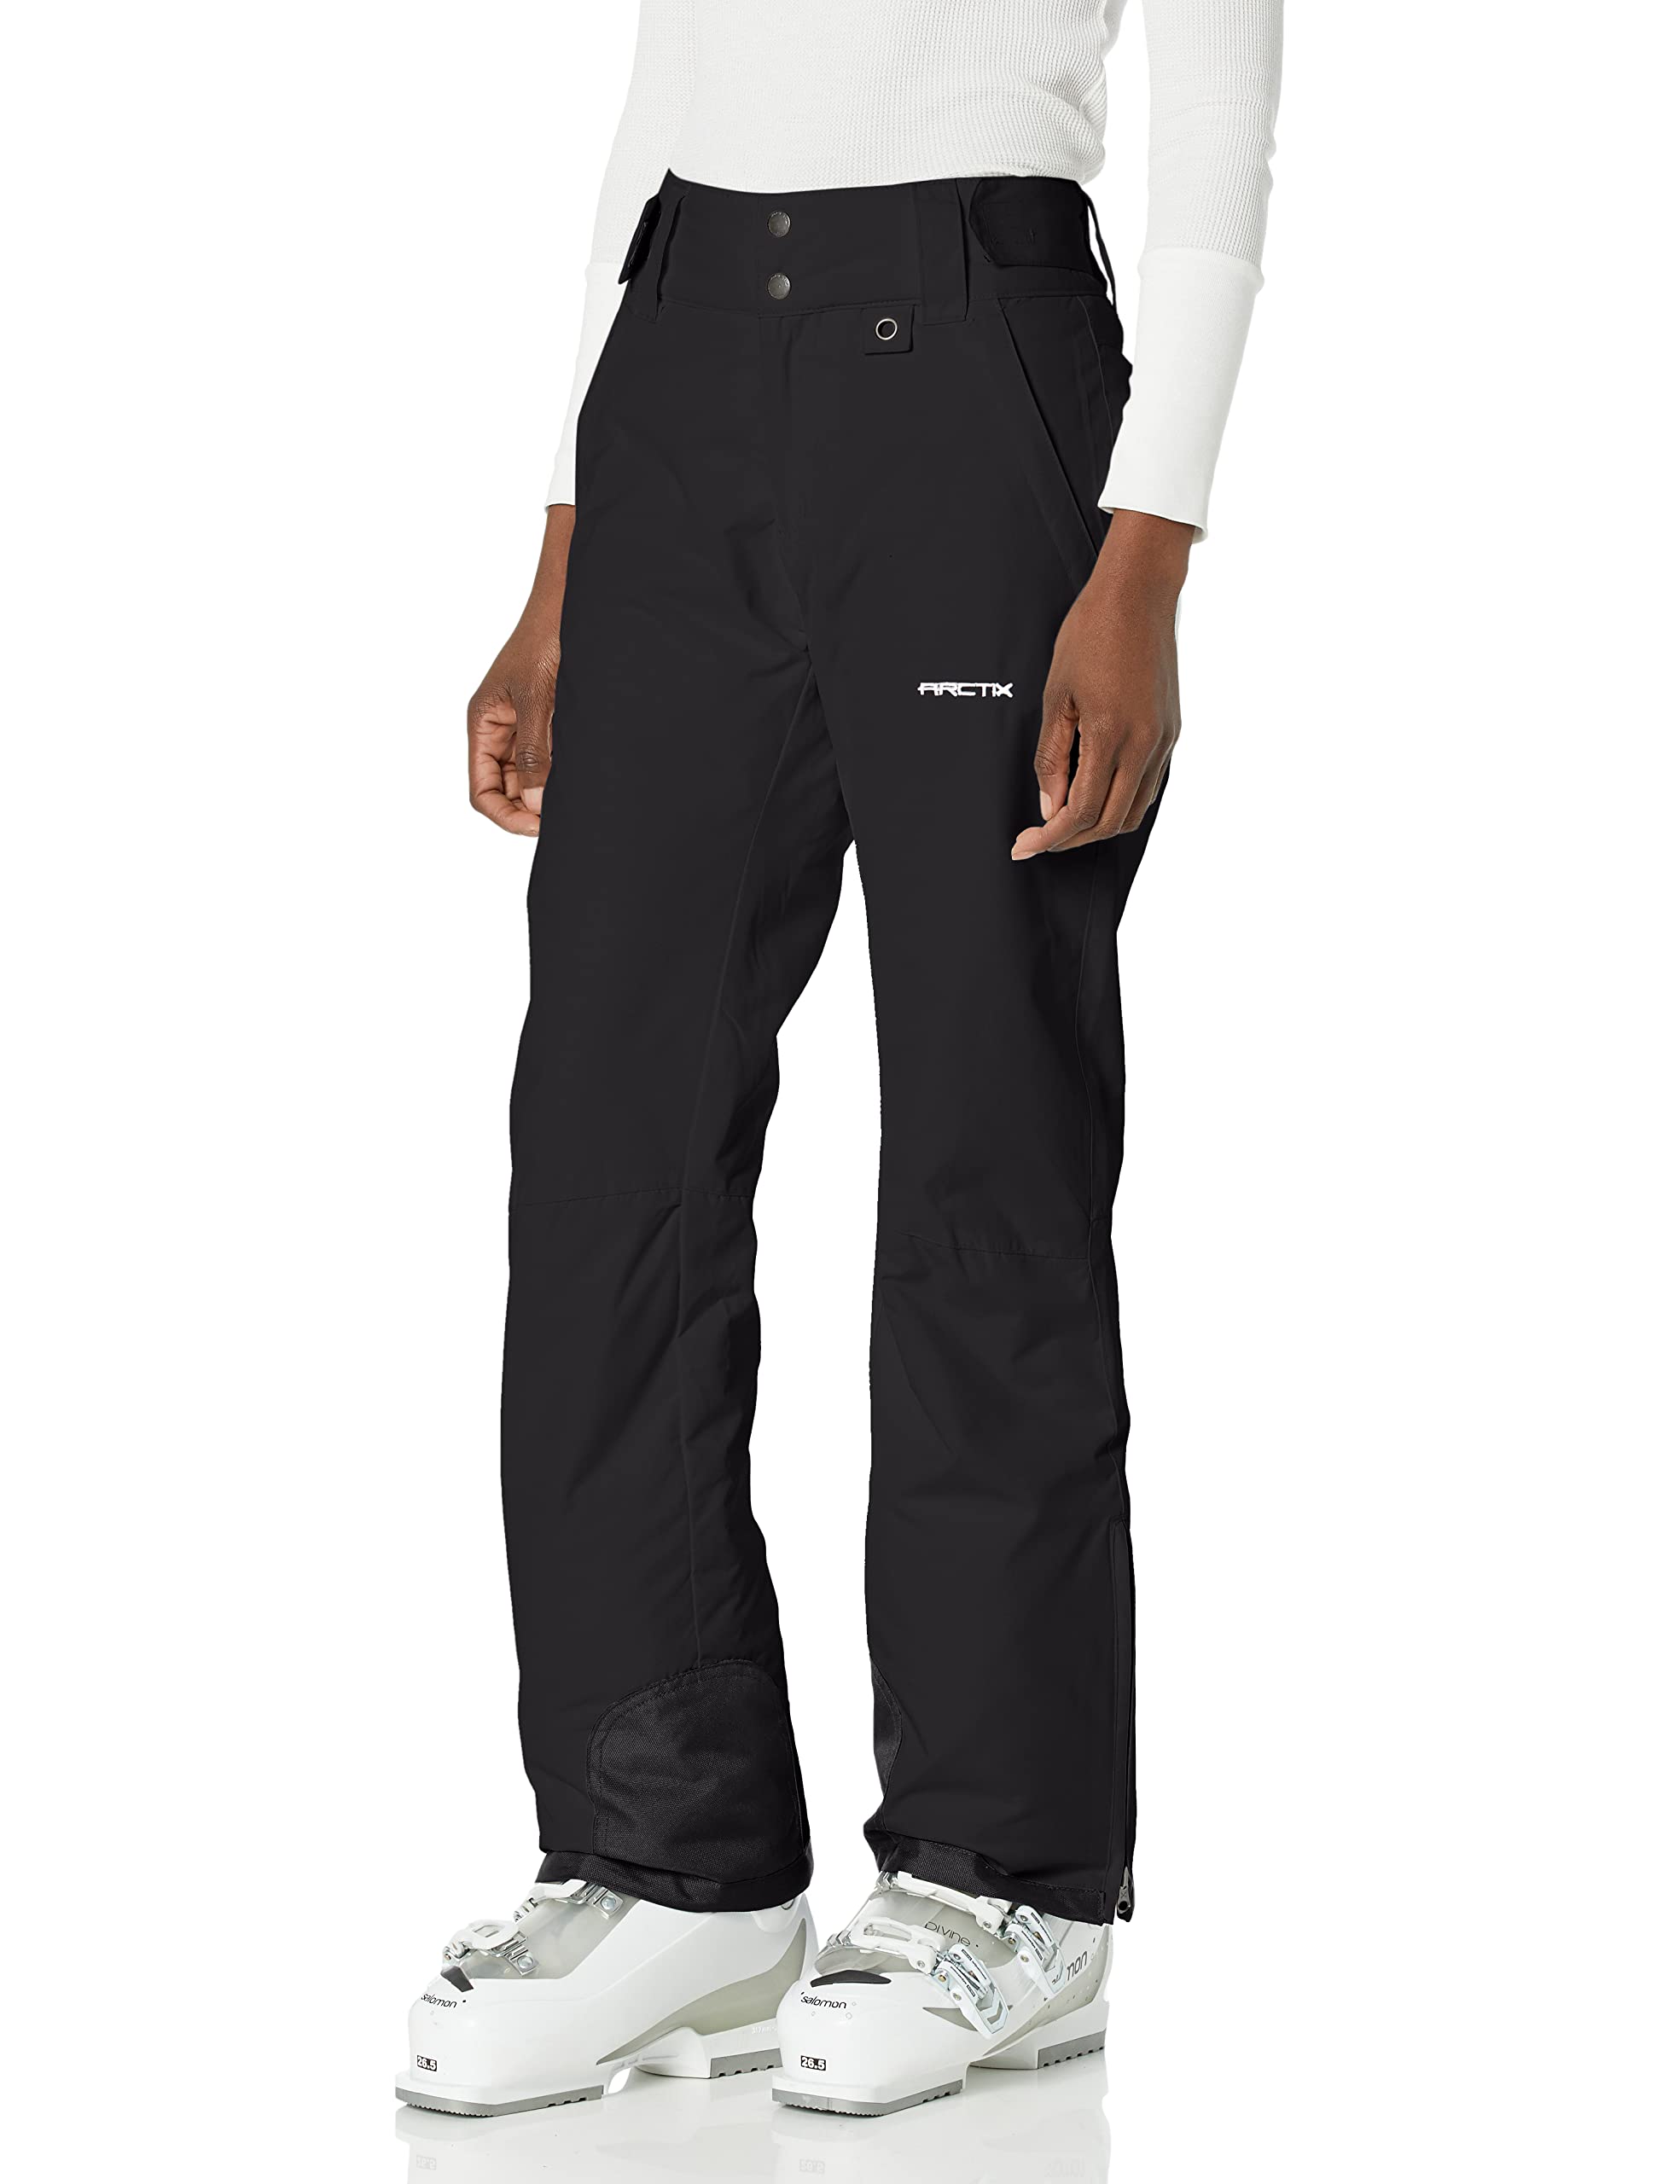 ARCTIX Women's Insulated Snow Pants Black Size Y1i8 for sale